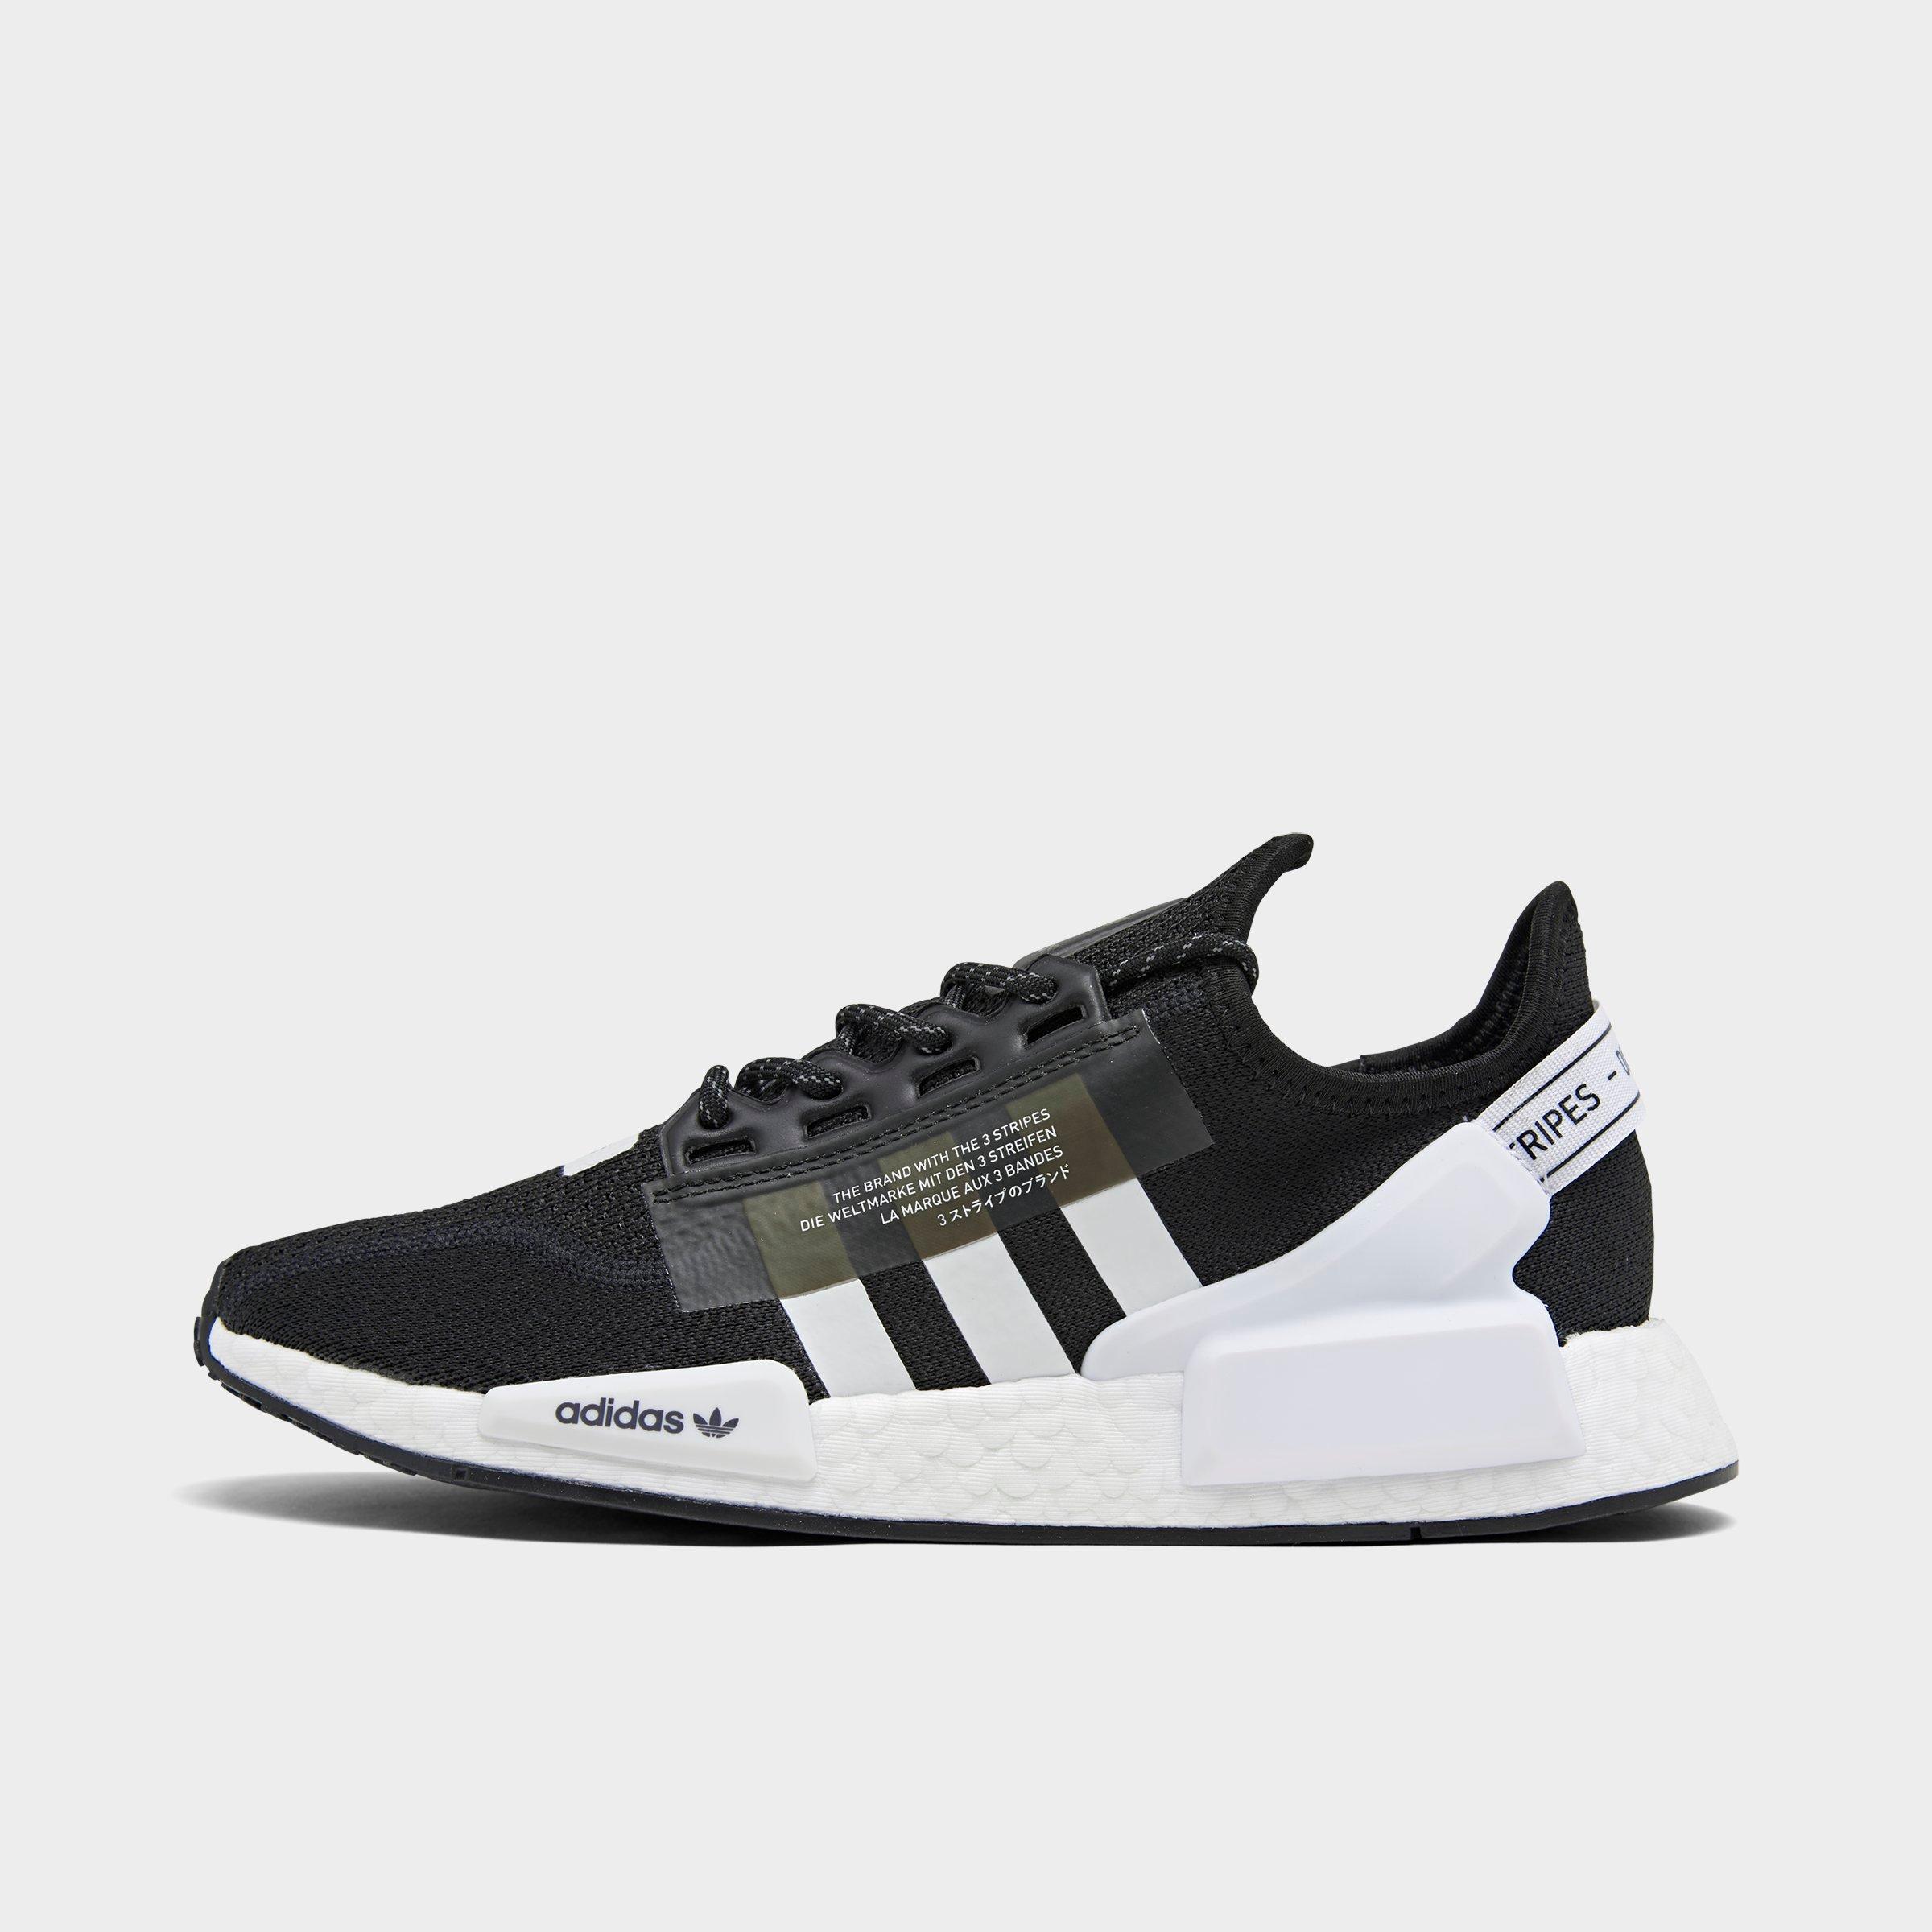 ADIDAS NMD R1 White Red Line EE5086 Shrimp Skin Shopping